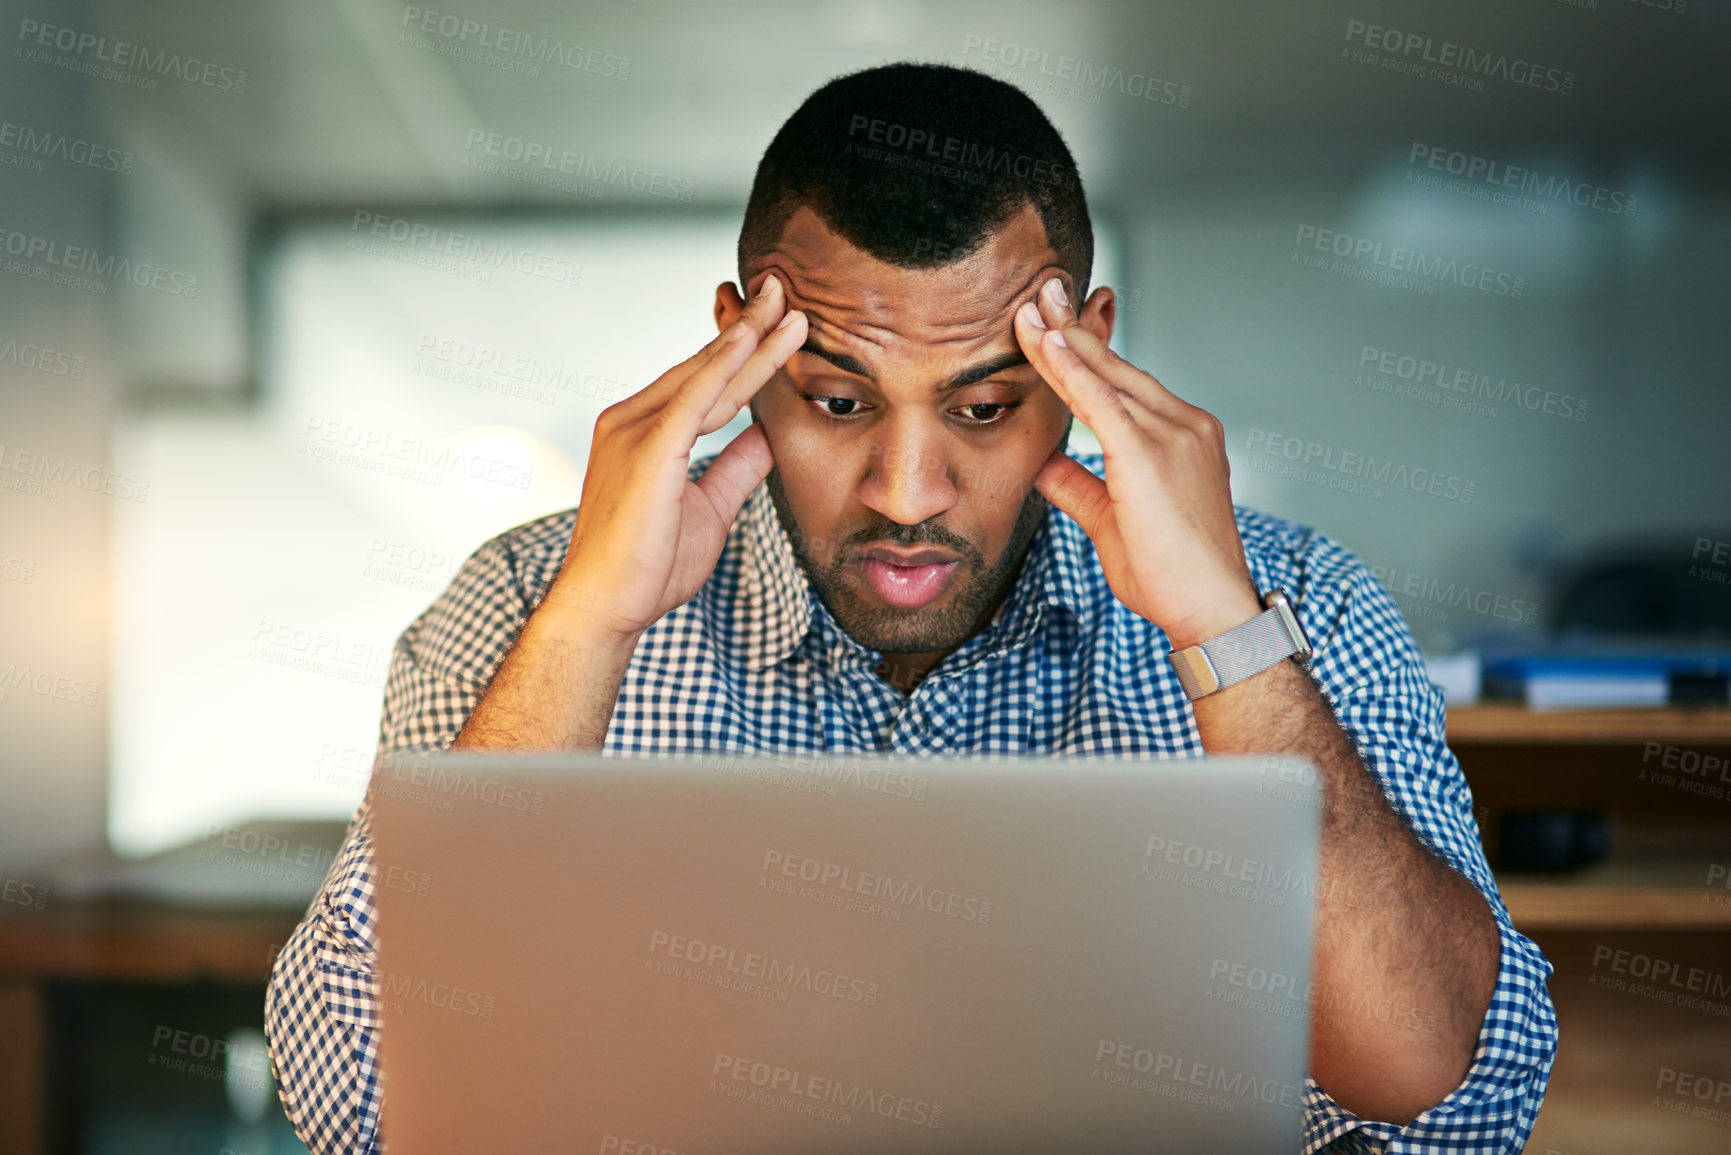 Buy stock photo Cropped shot of a young businessman looking stressed while working in the office